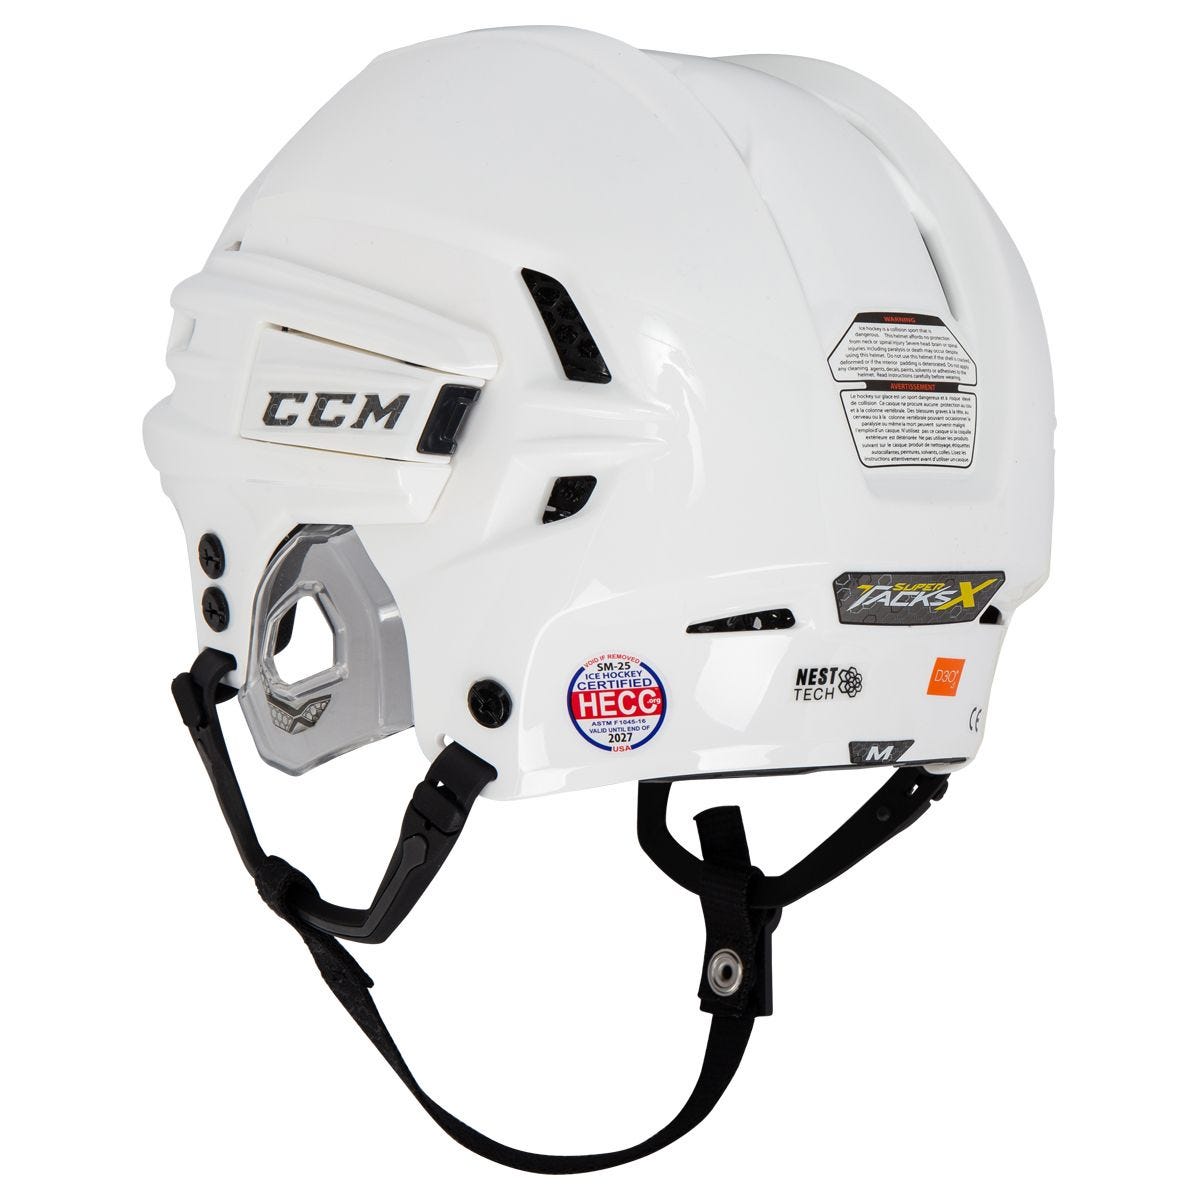 CCM Hockey Australia - That new helmet feel! The new CCM Super Tacks 910  Hockey Helmet are in stock in-store and online, with free shipping  Australia wide. A sleek new helmet, featuring